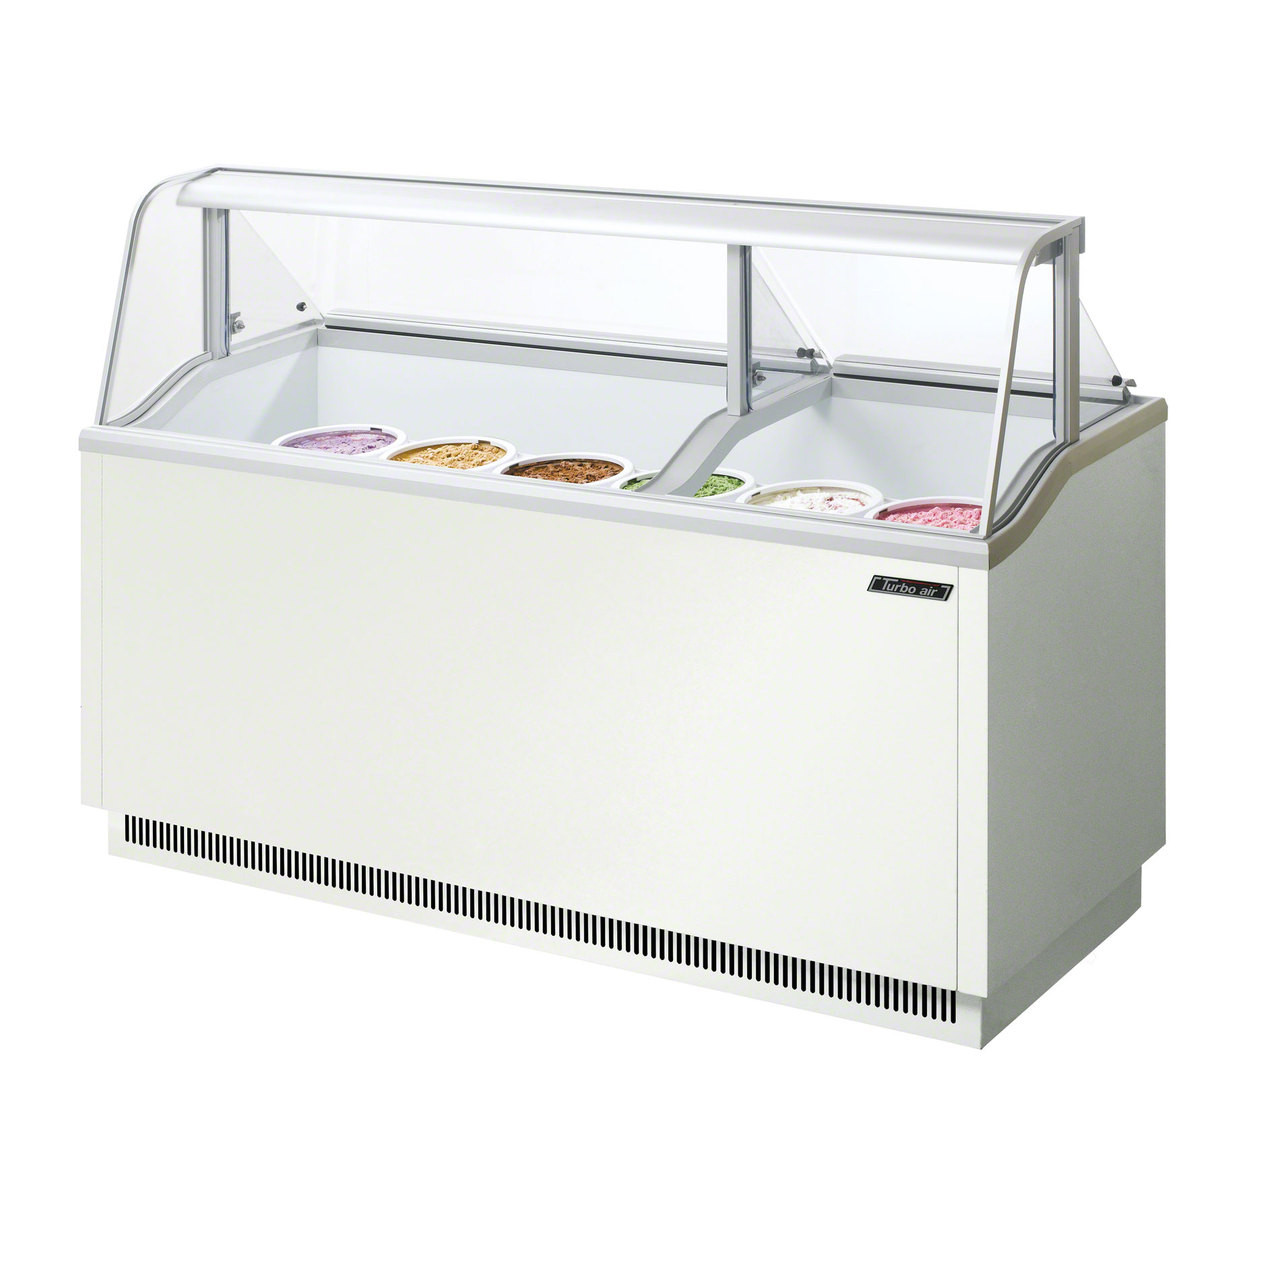 Americooler Ice Cream Dipping Cabinets Model Tidc 70 Byturbo Air